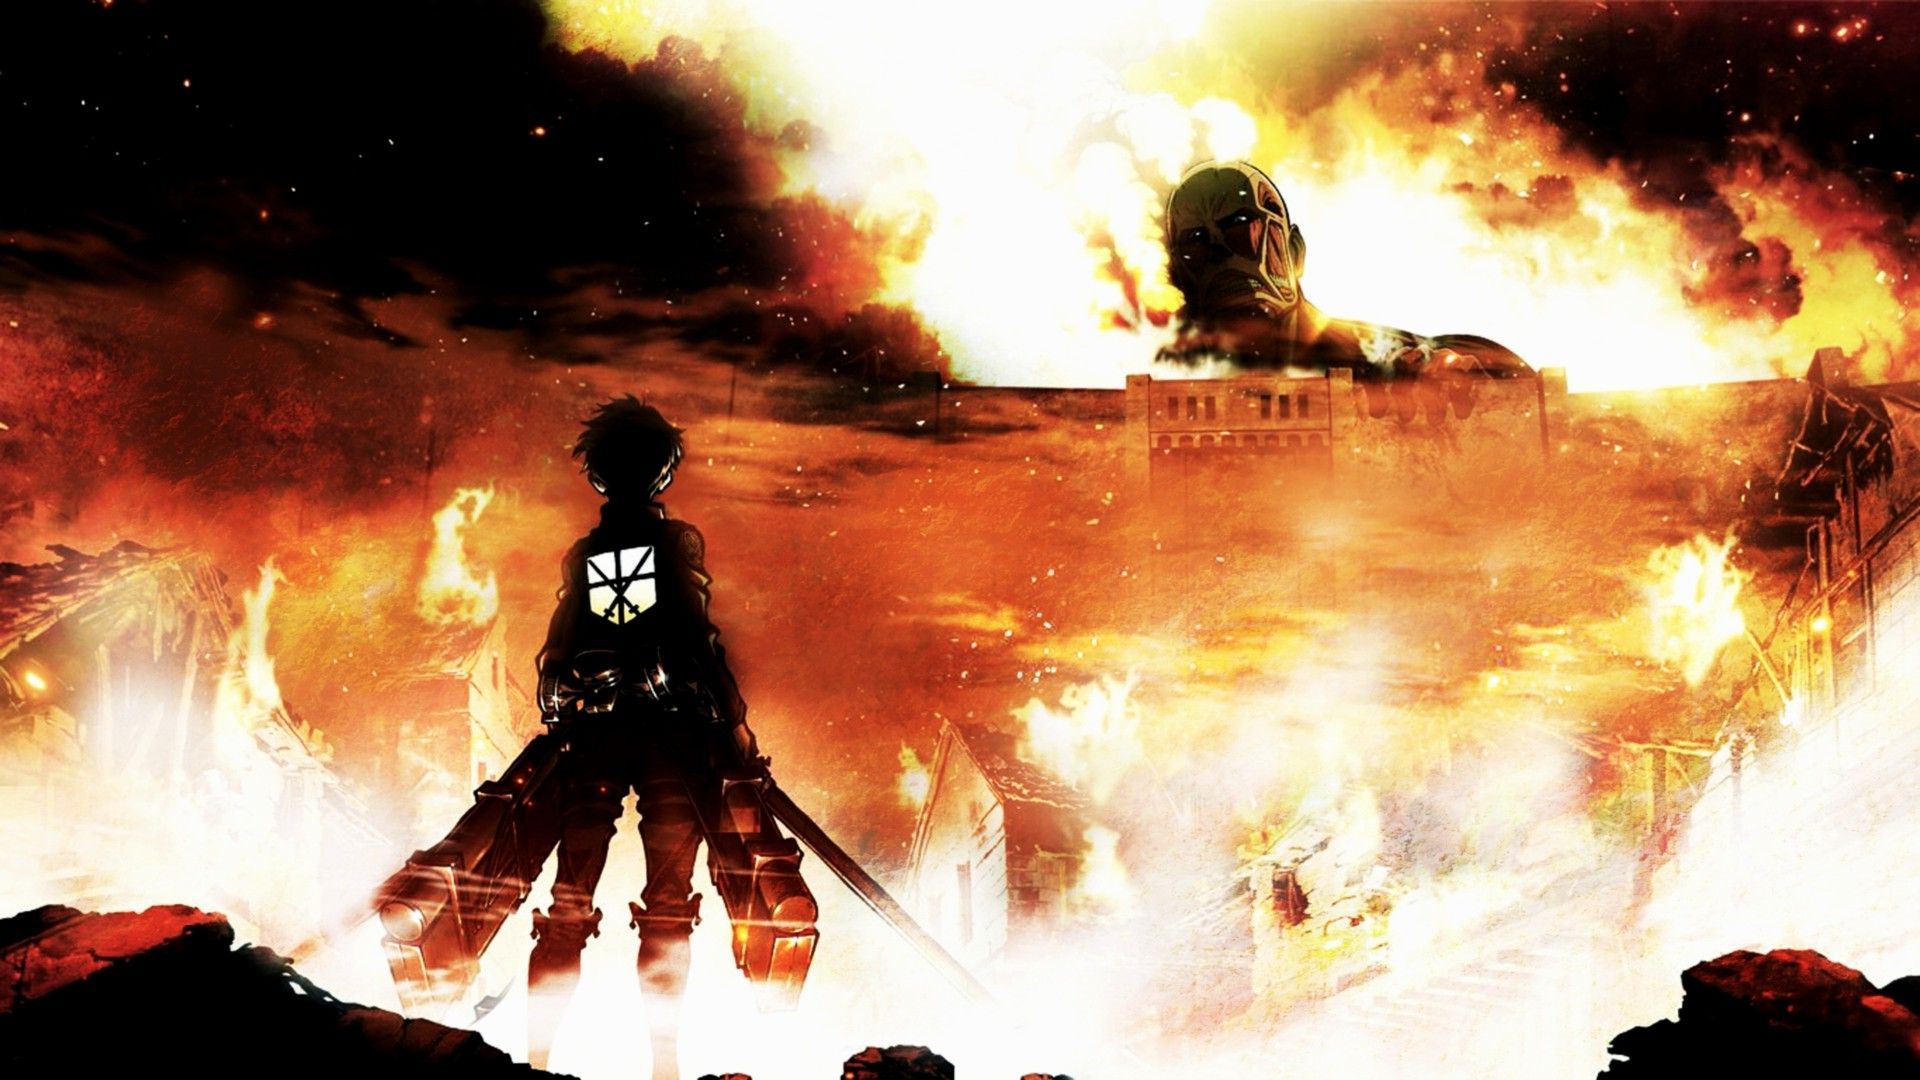  Attack on Titan is mostly a drama but has horror and extreme action